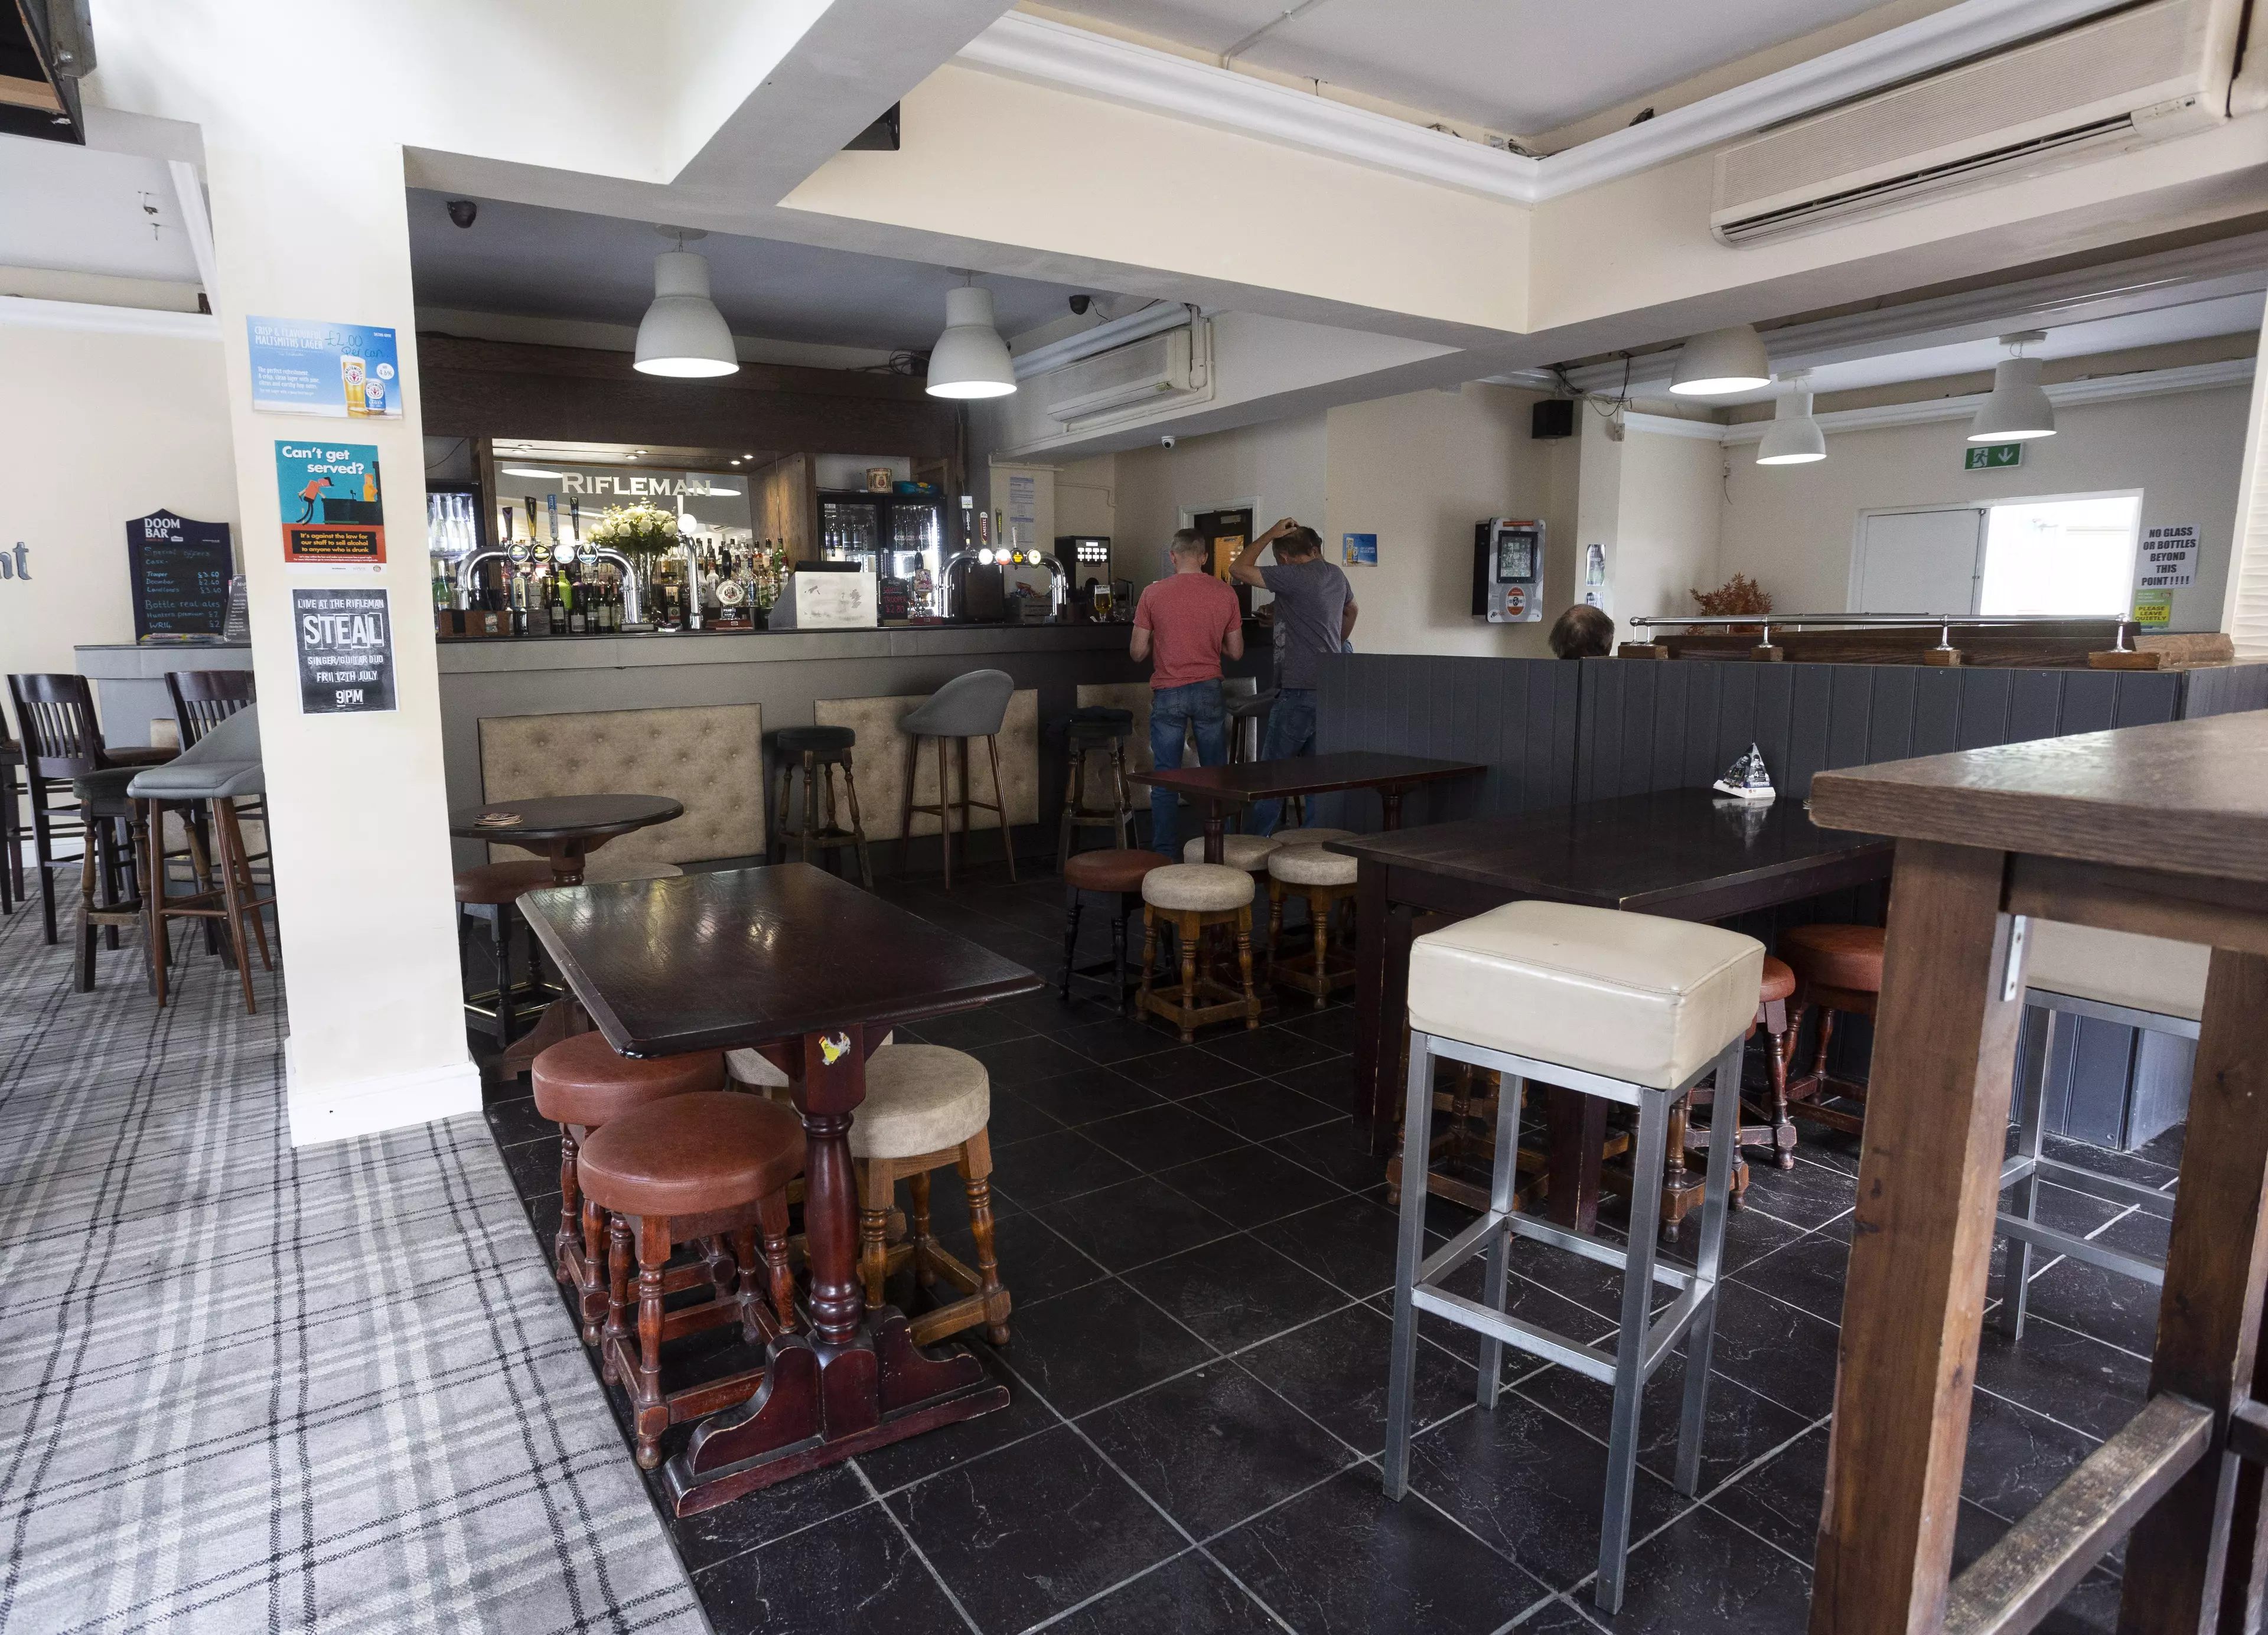 The Rifleman has undergone a transformation since it closed in 2016.